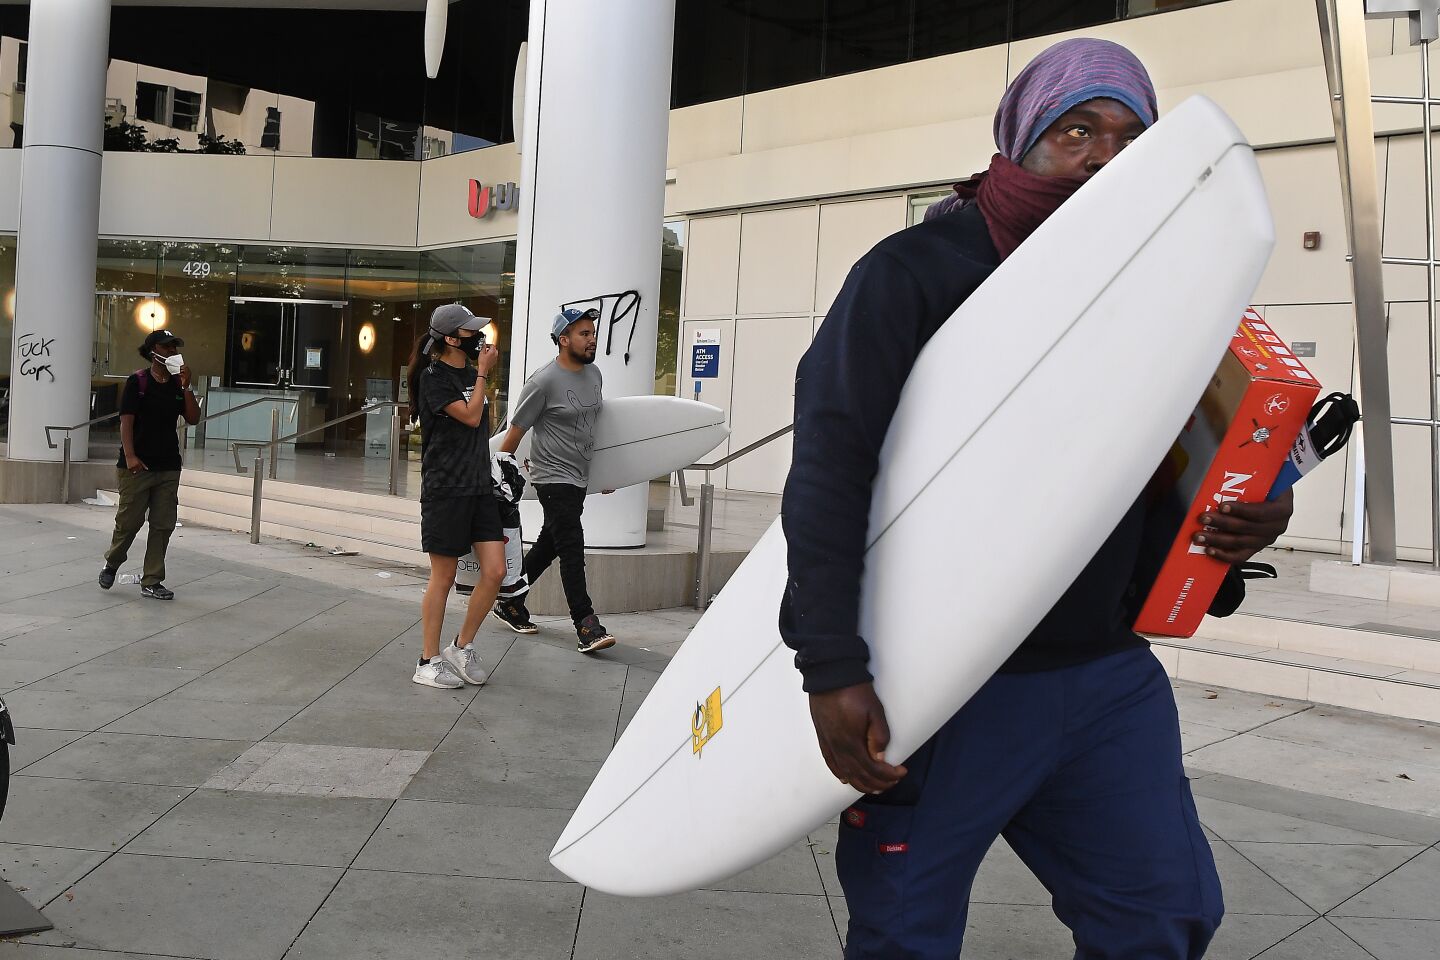 People walk away with surfboards in Santa Monica on Sunday.